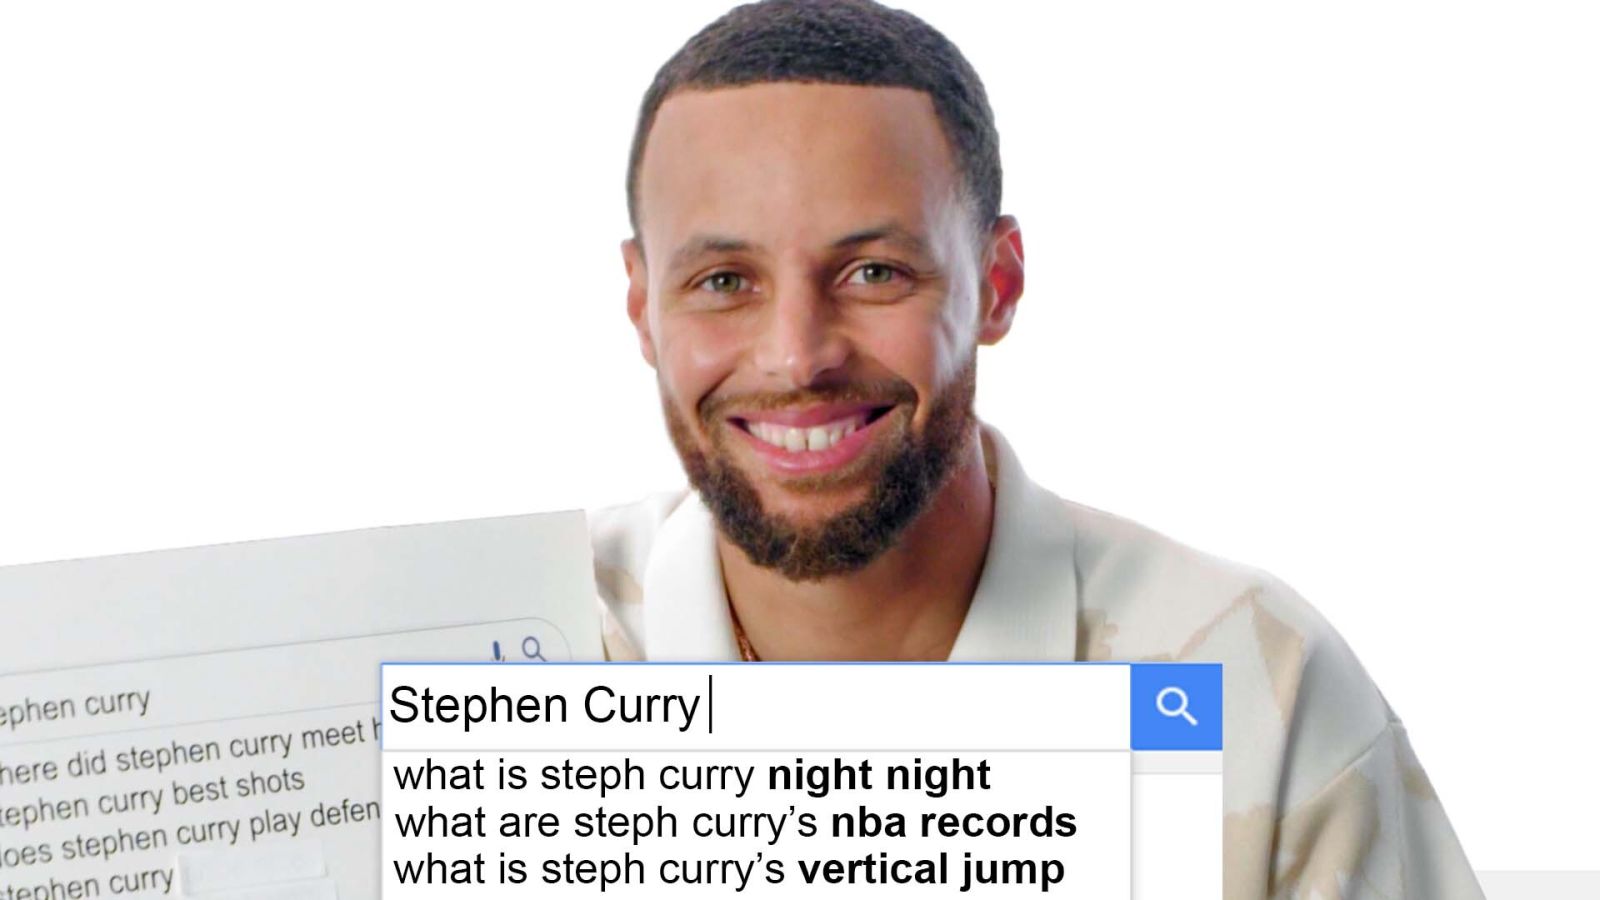 Stephen Curry Answers The Web's Most Searched Questions